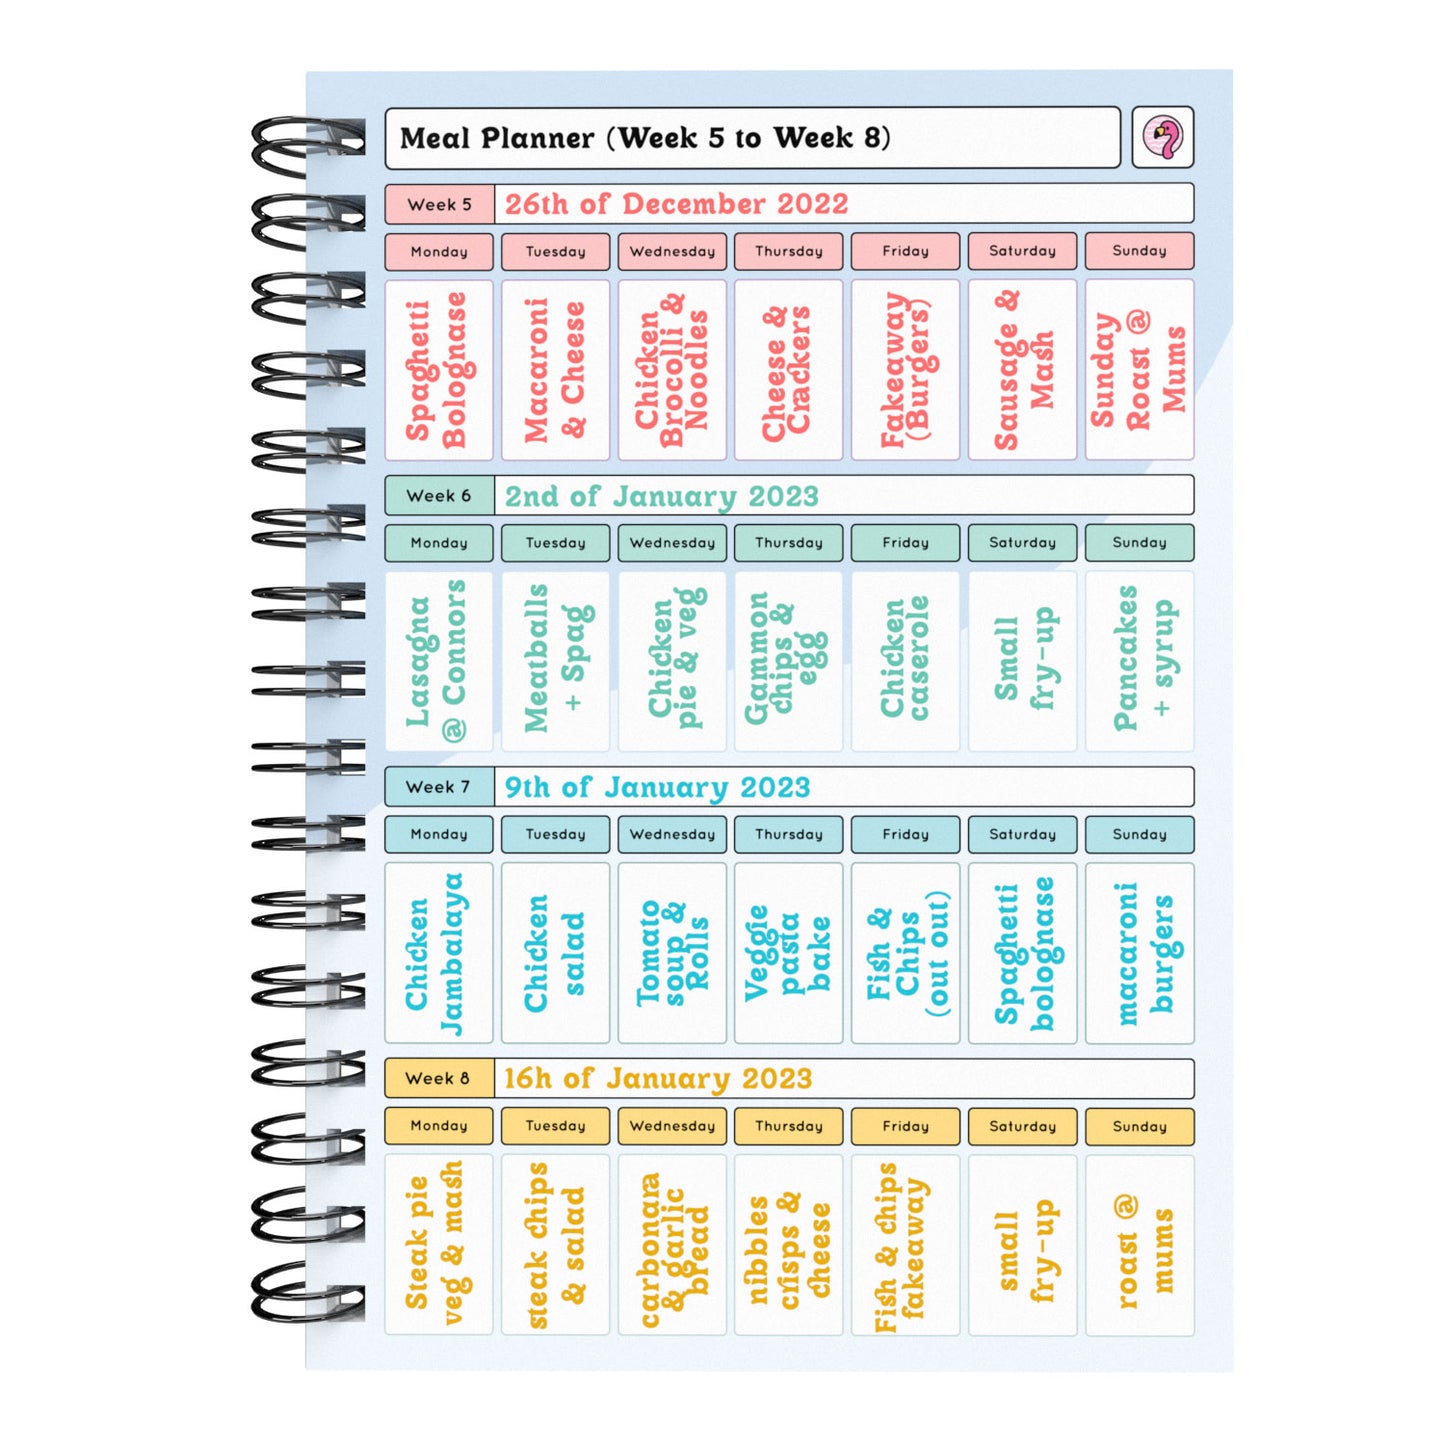 Food Diary - C55 - Calorie Counting